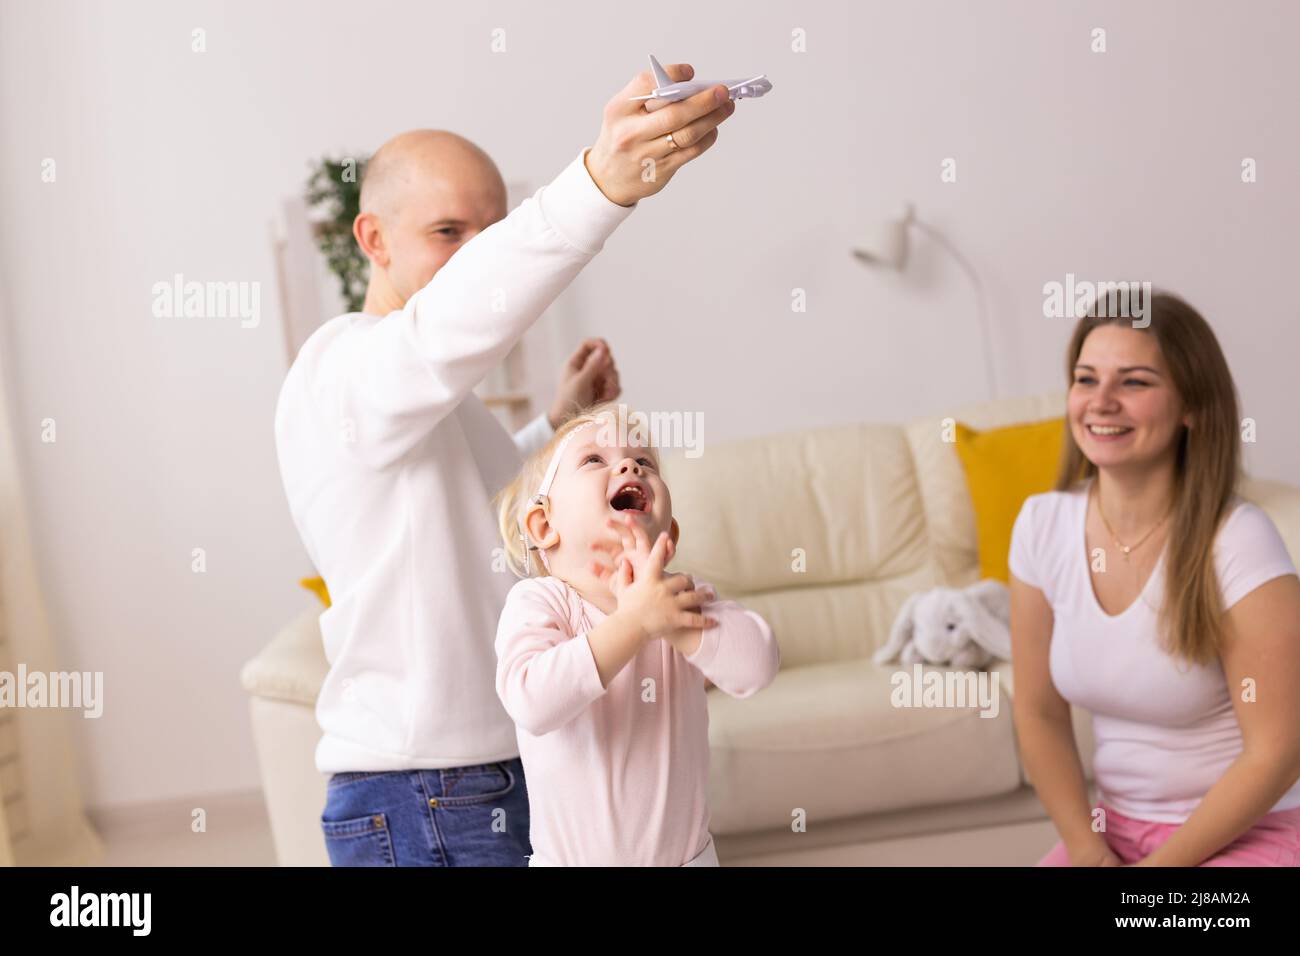 Happy child girl with cochlear implant having fun with her family - hearing aid for deaf and innovative health technology concept Stock Photo